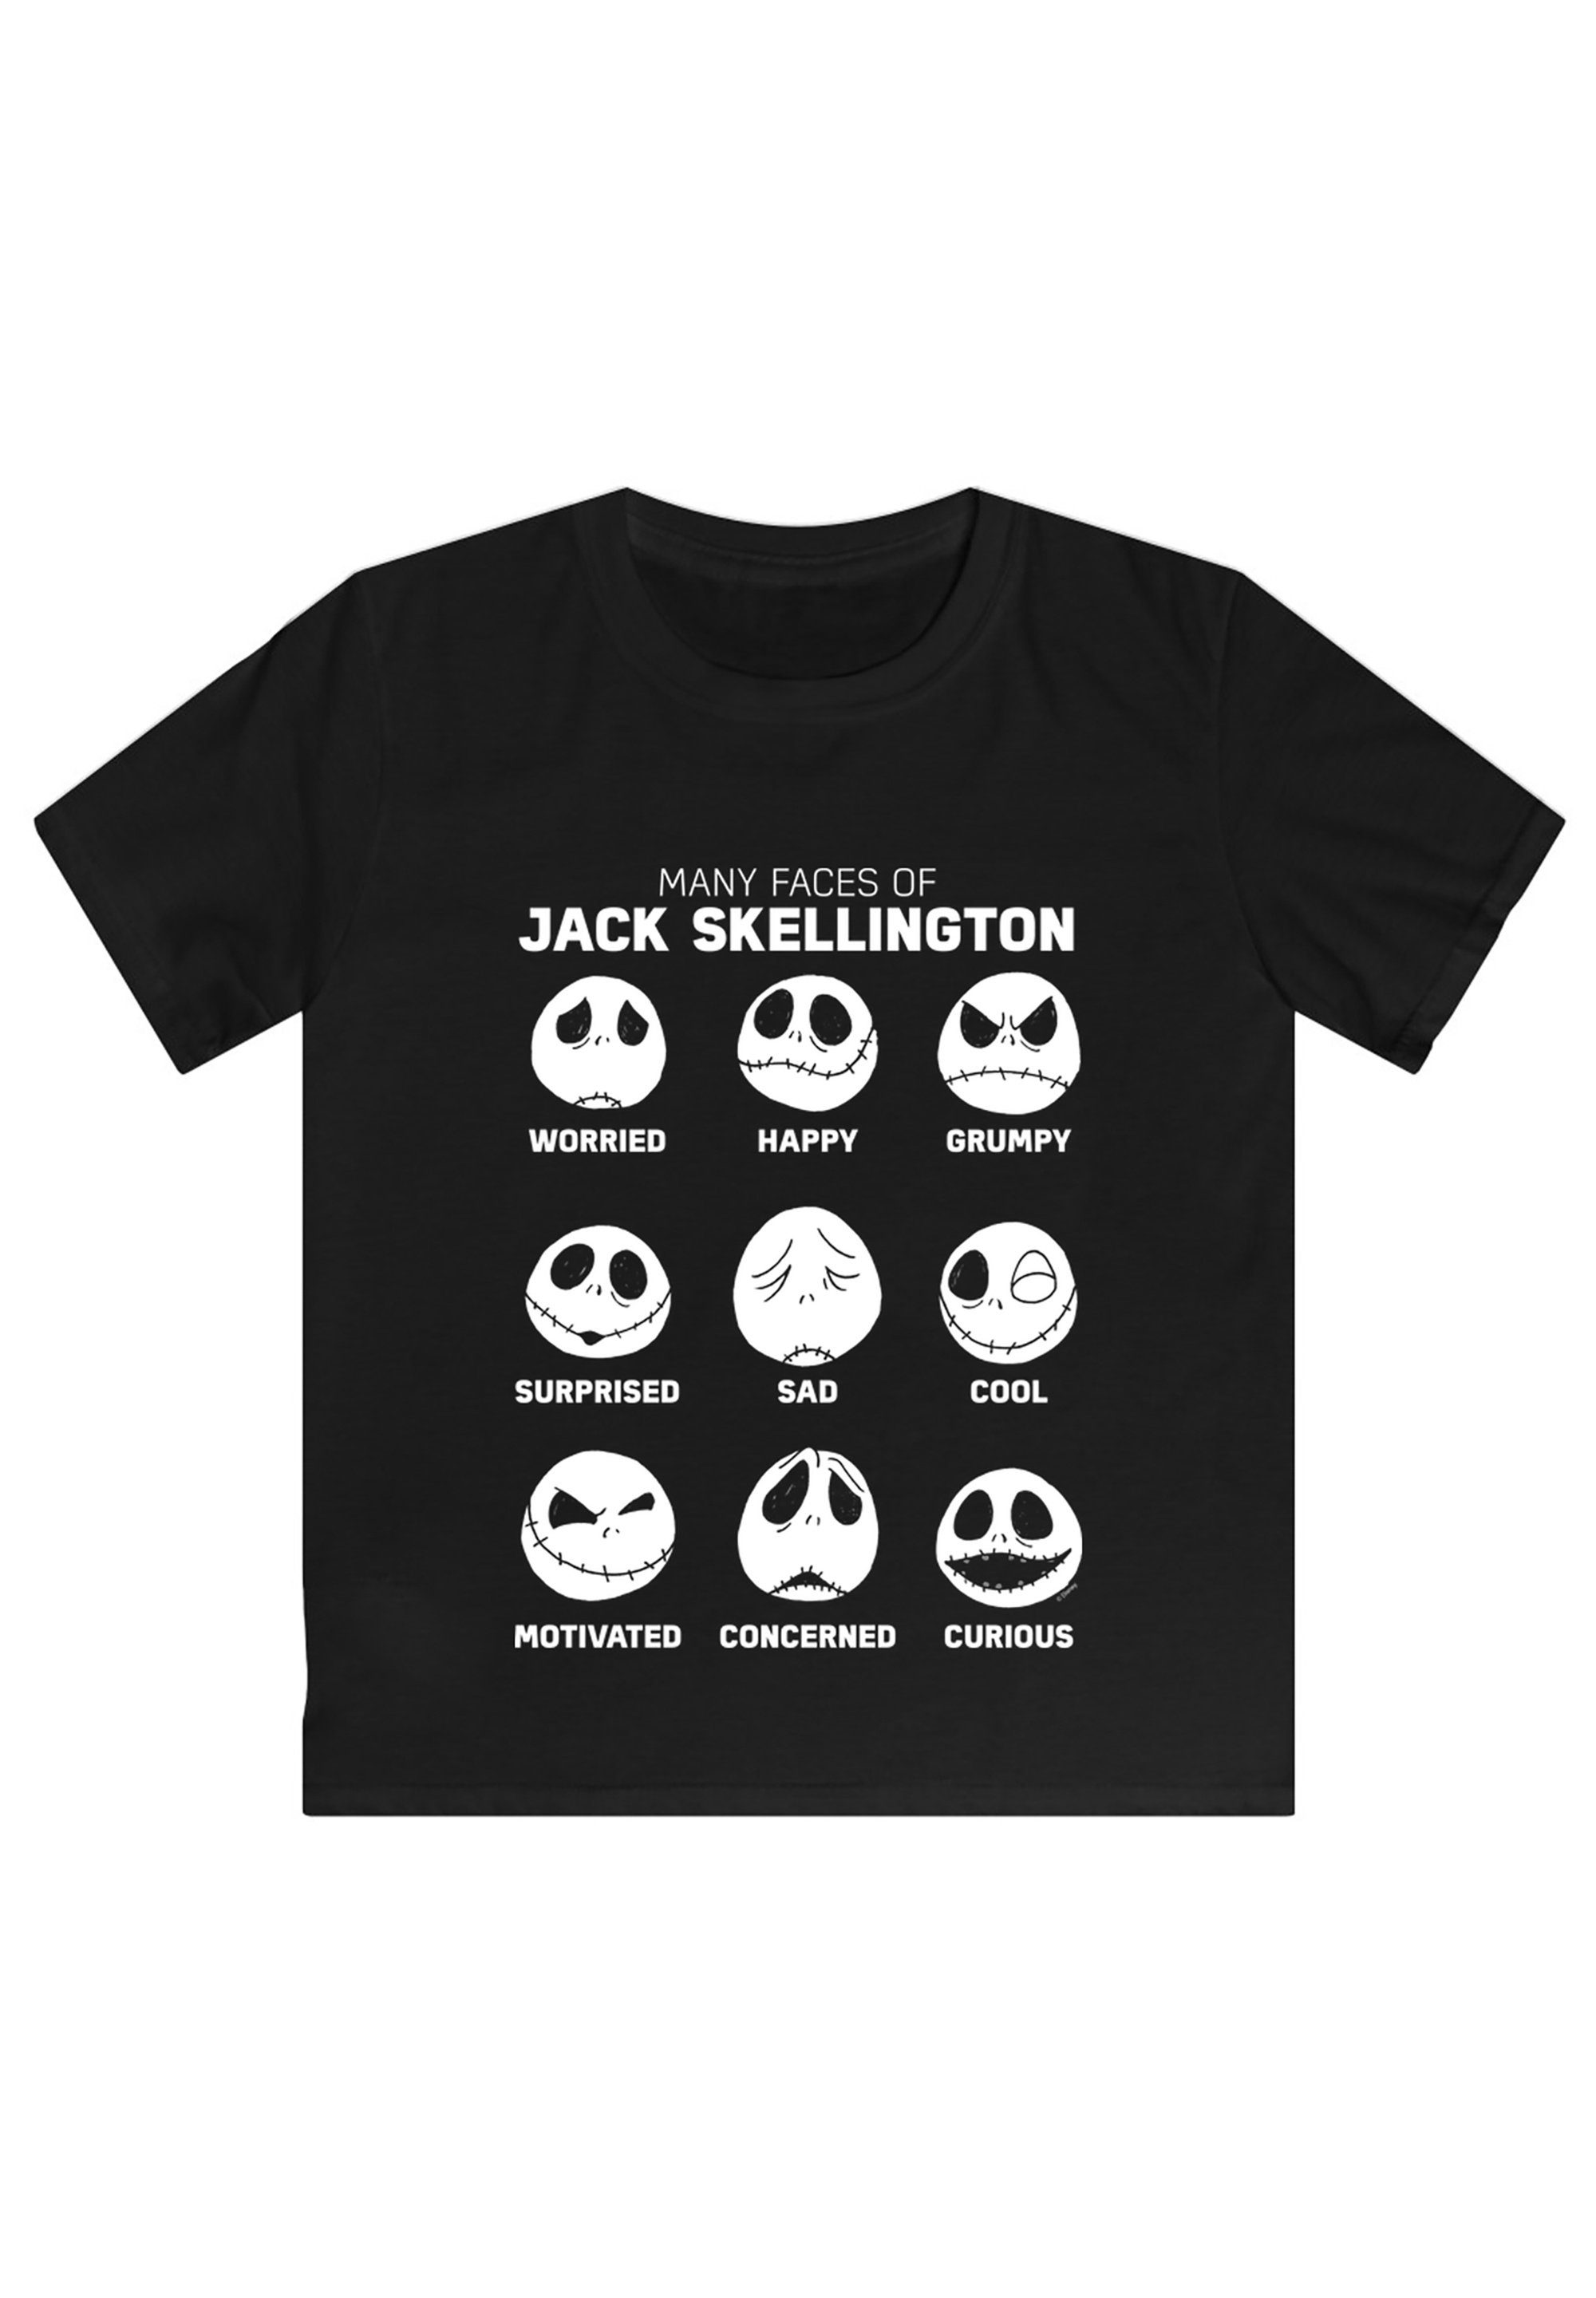 Faces of Nightmare Before Christmas Print F4NT4STIC T-Shirt Disney Jack